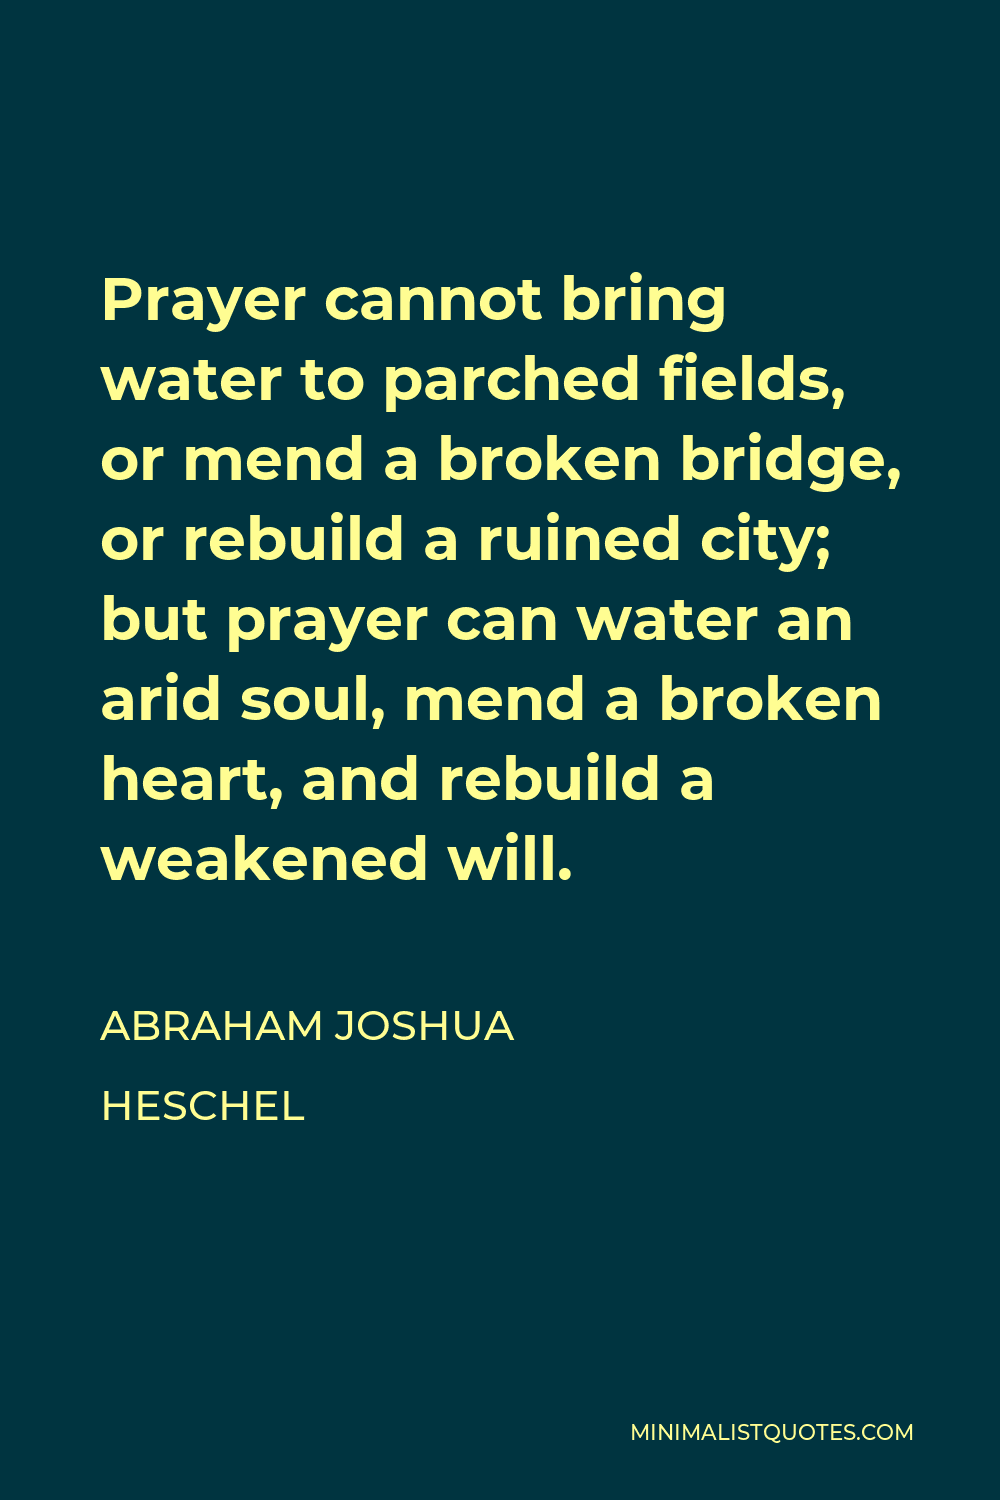 Abraham Joshua Heschel Quote - Prayer cannot bring water to parched fields, or mend a broken bridge, or rebuild a ruined city; but prayer can water an arid soul, mend a broken heart, and rebuild a weakened will.